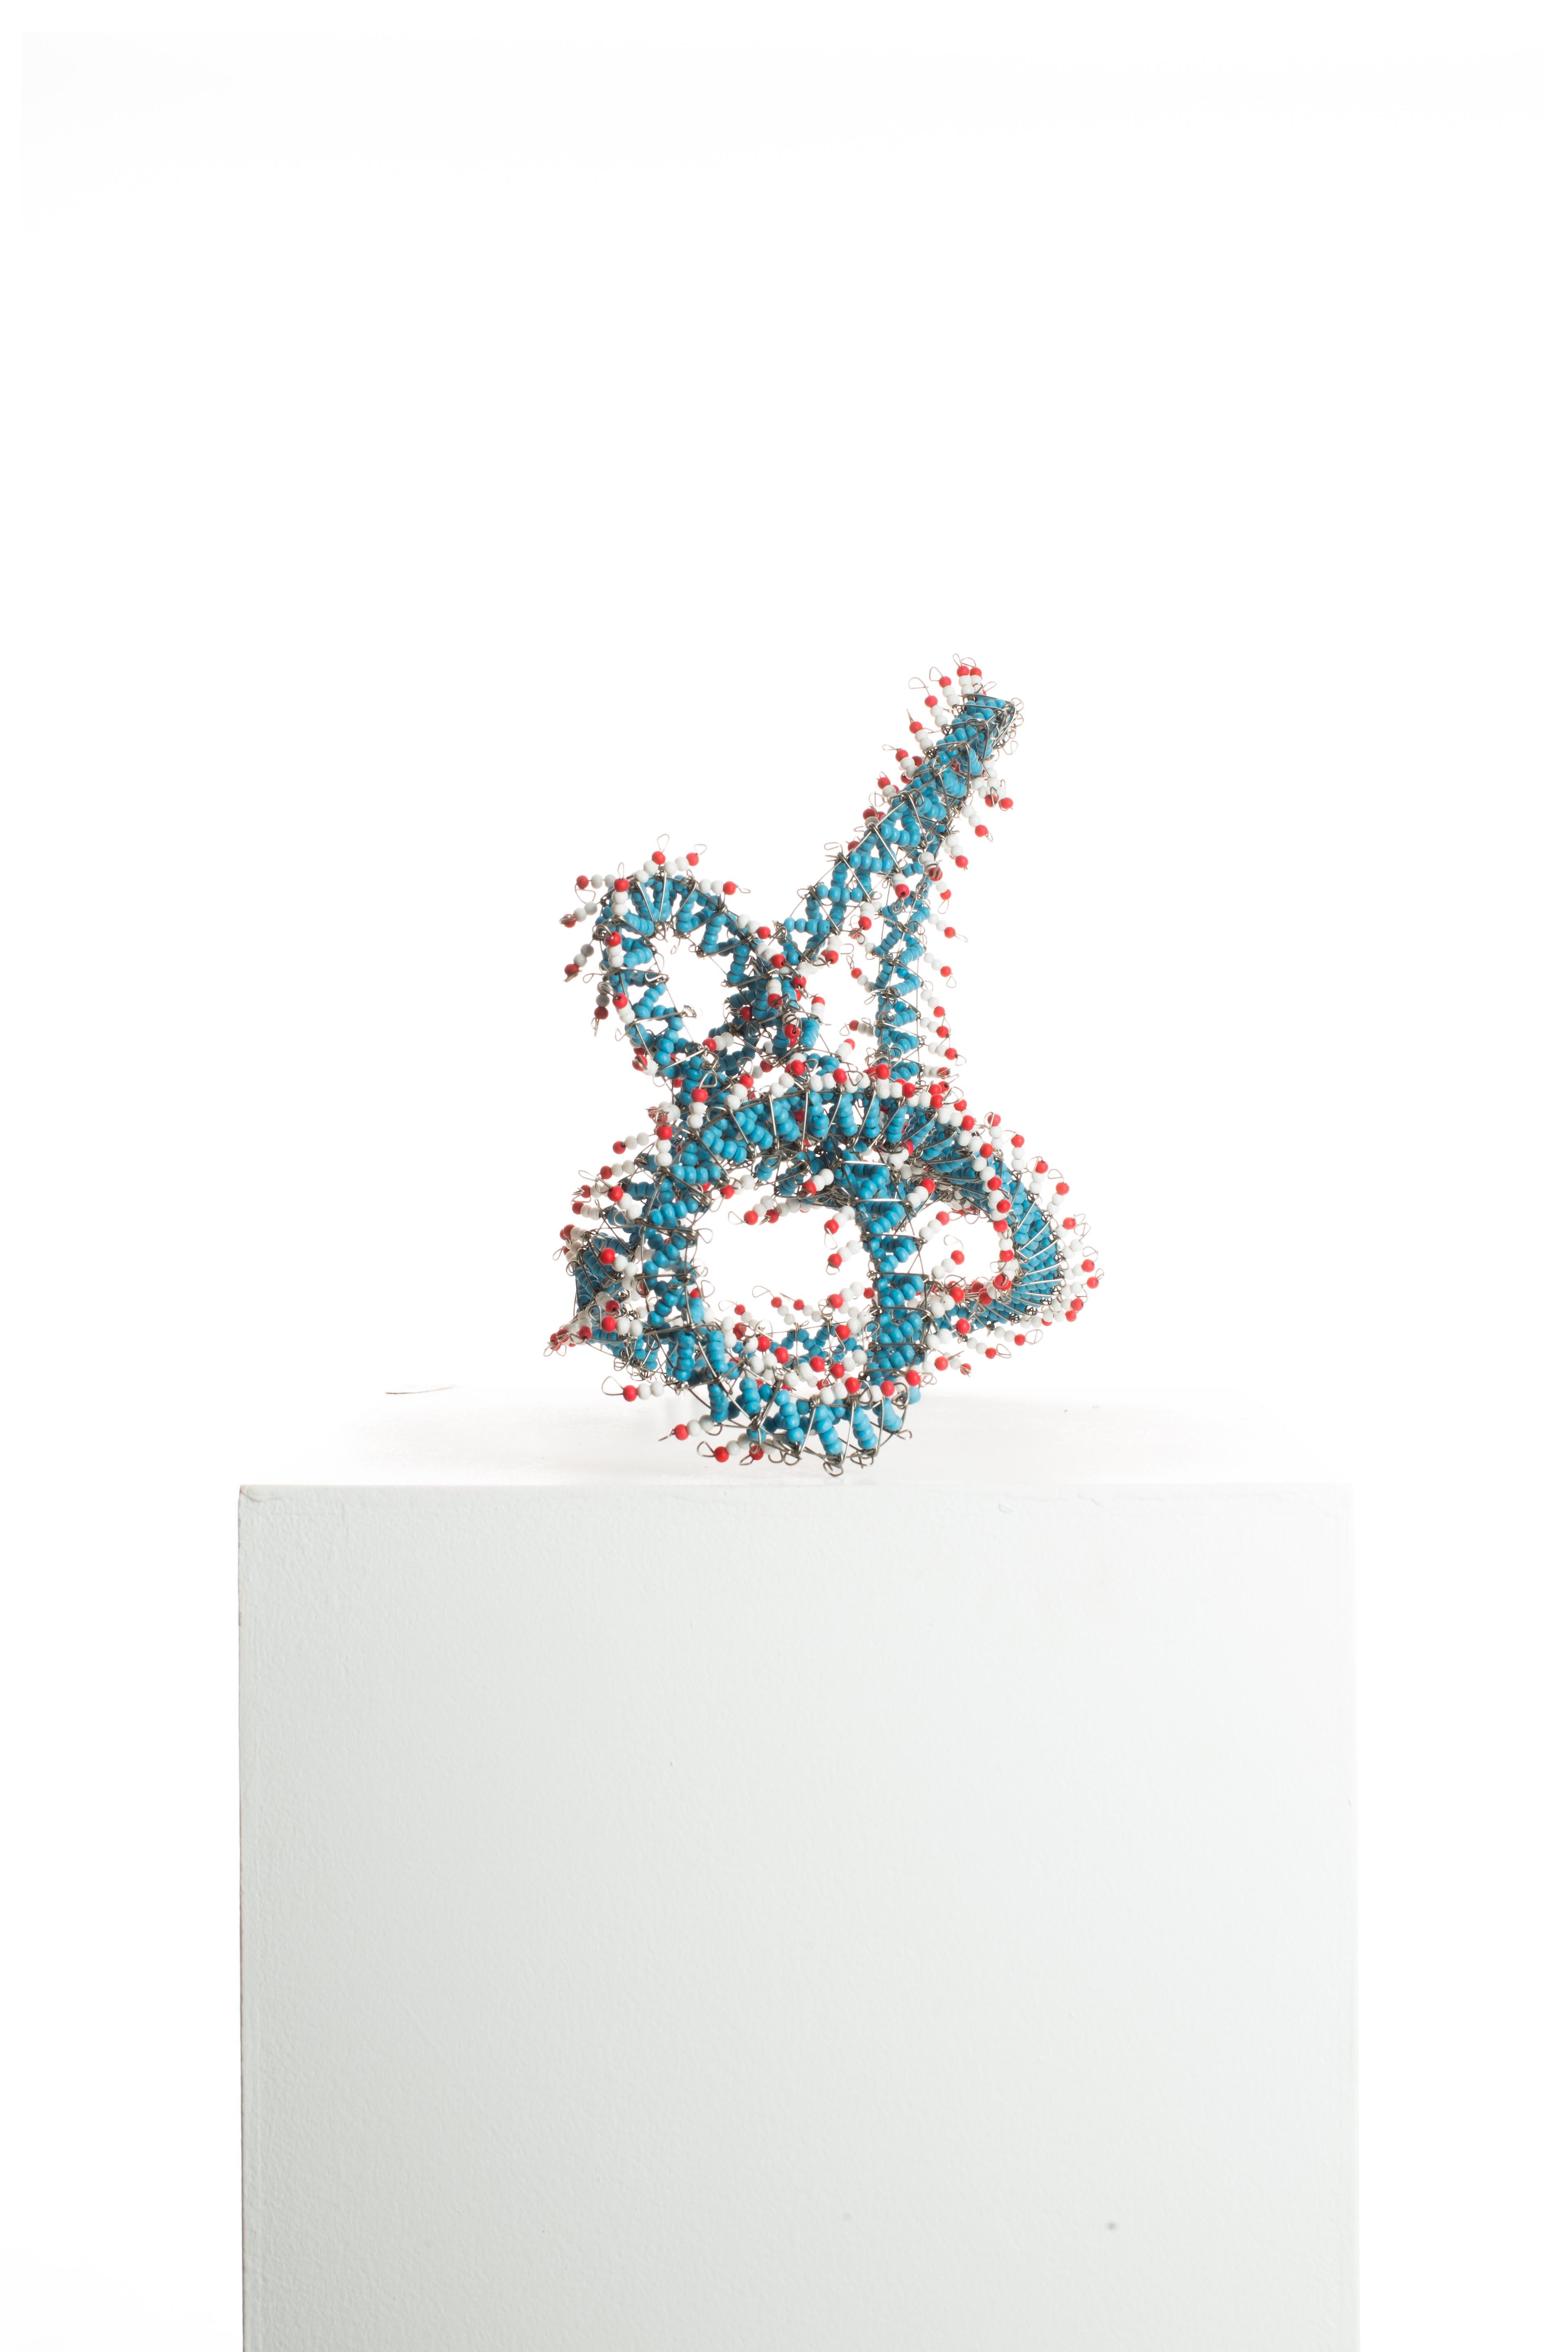 Blue, Red, White, Beaded, Steel, Pattern, Abstract, Contemporary, Modern, Art - Sculpture by Driaan Claassen